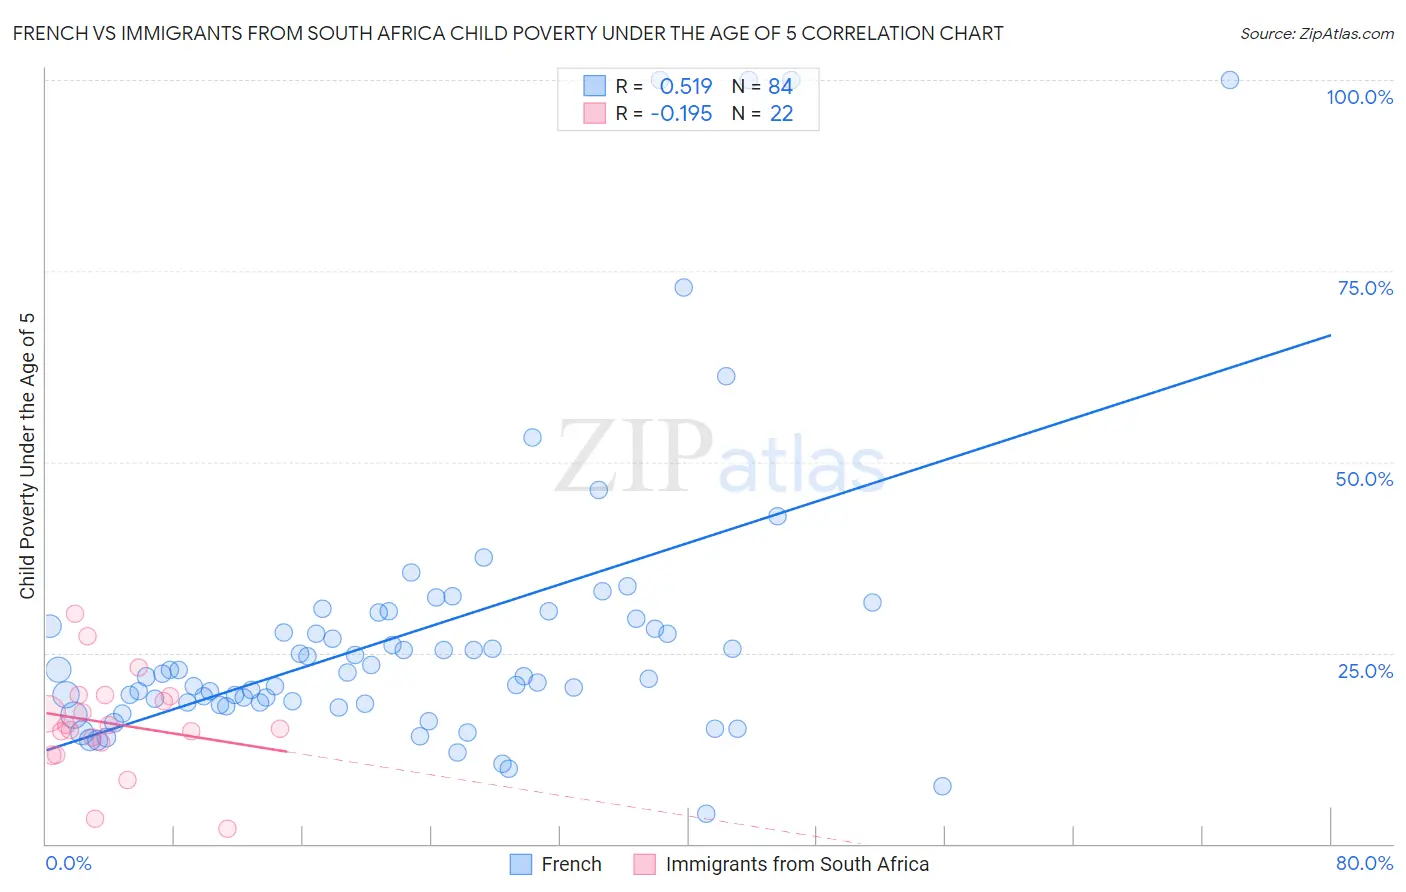 French vs Immigrants from South Africa Child Poverty Under the Age of 5